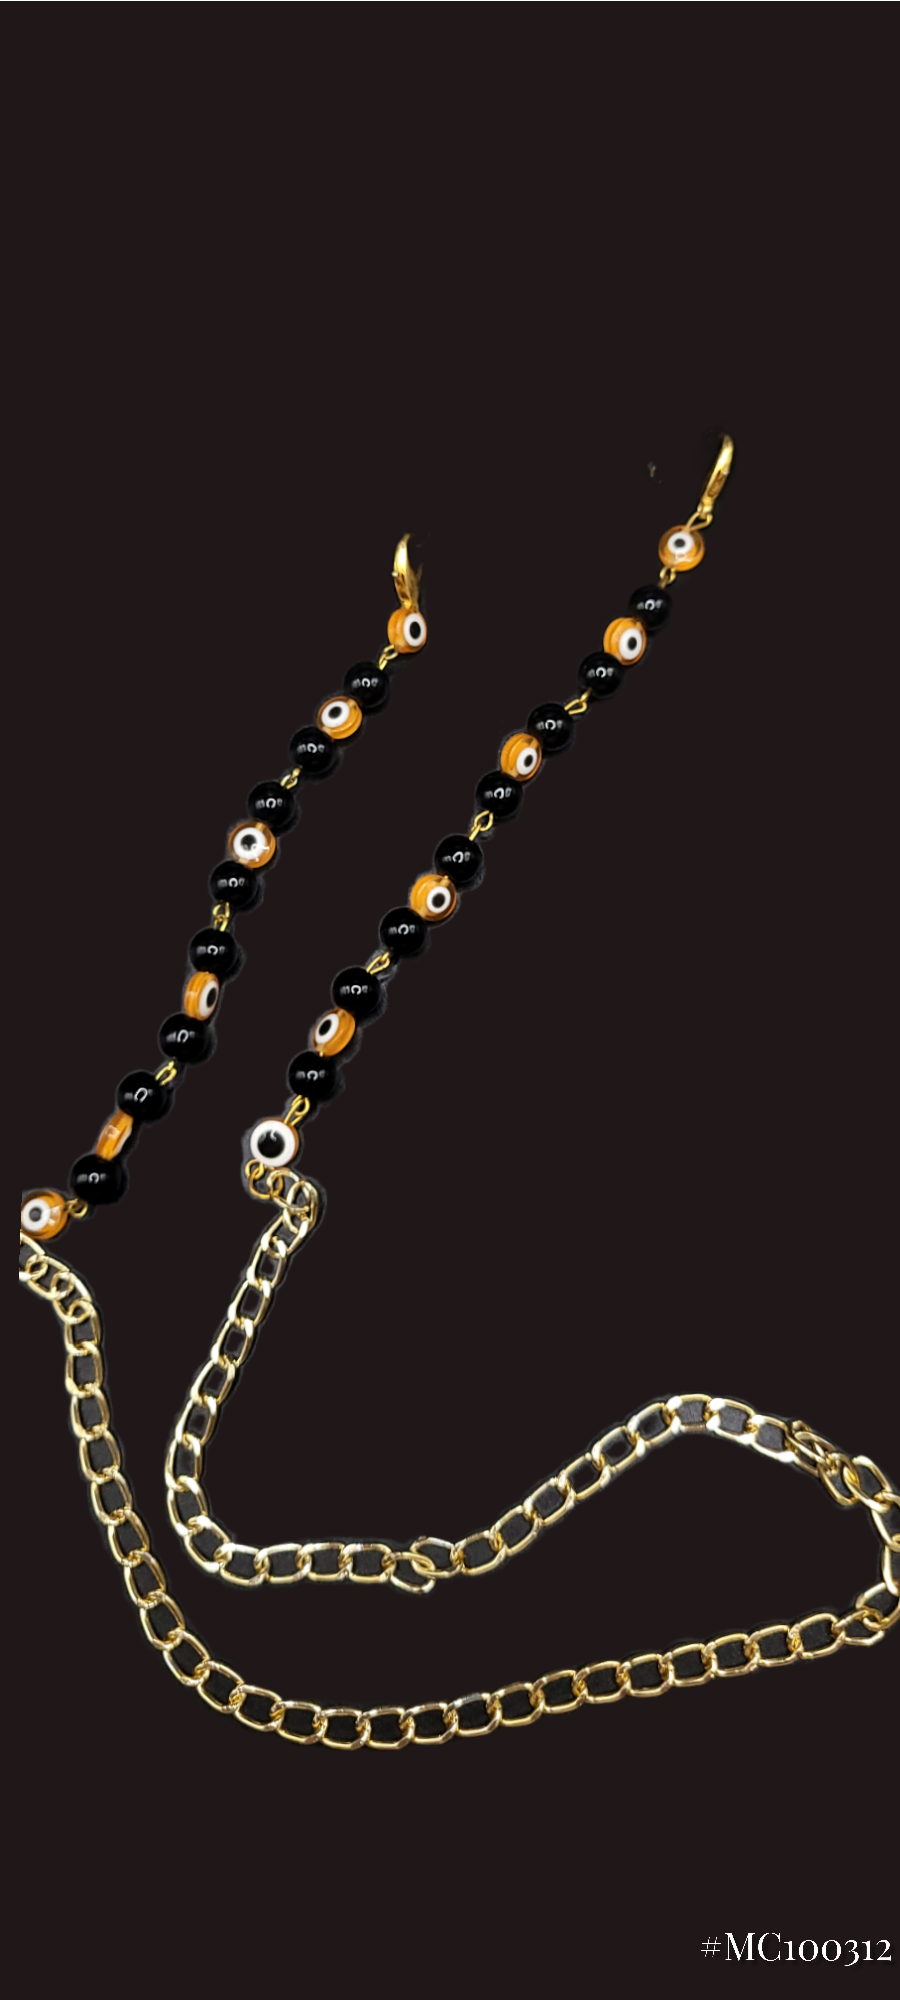 EYE CATCHING MASK CHAIN IN ORANGE COLOR